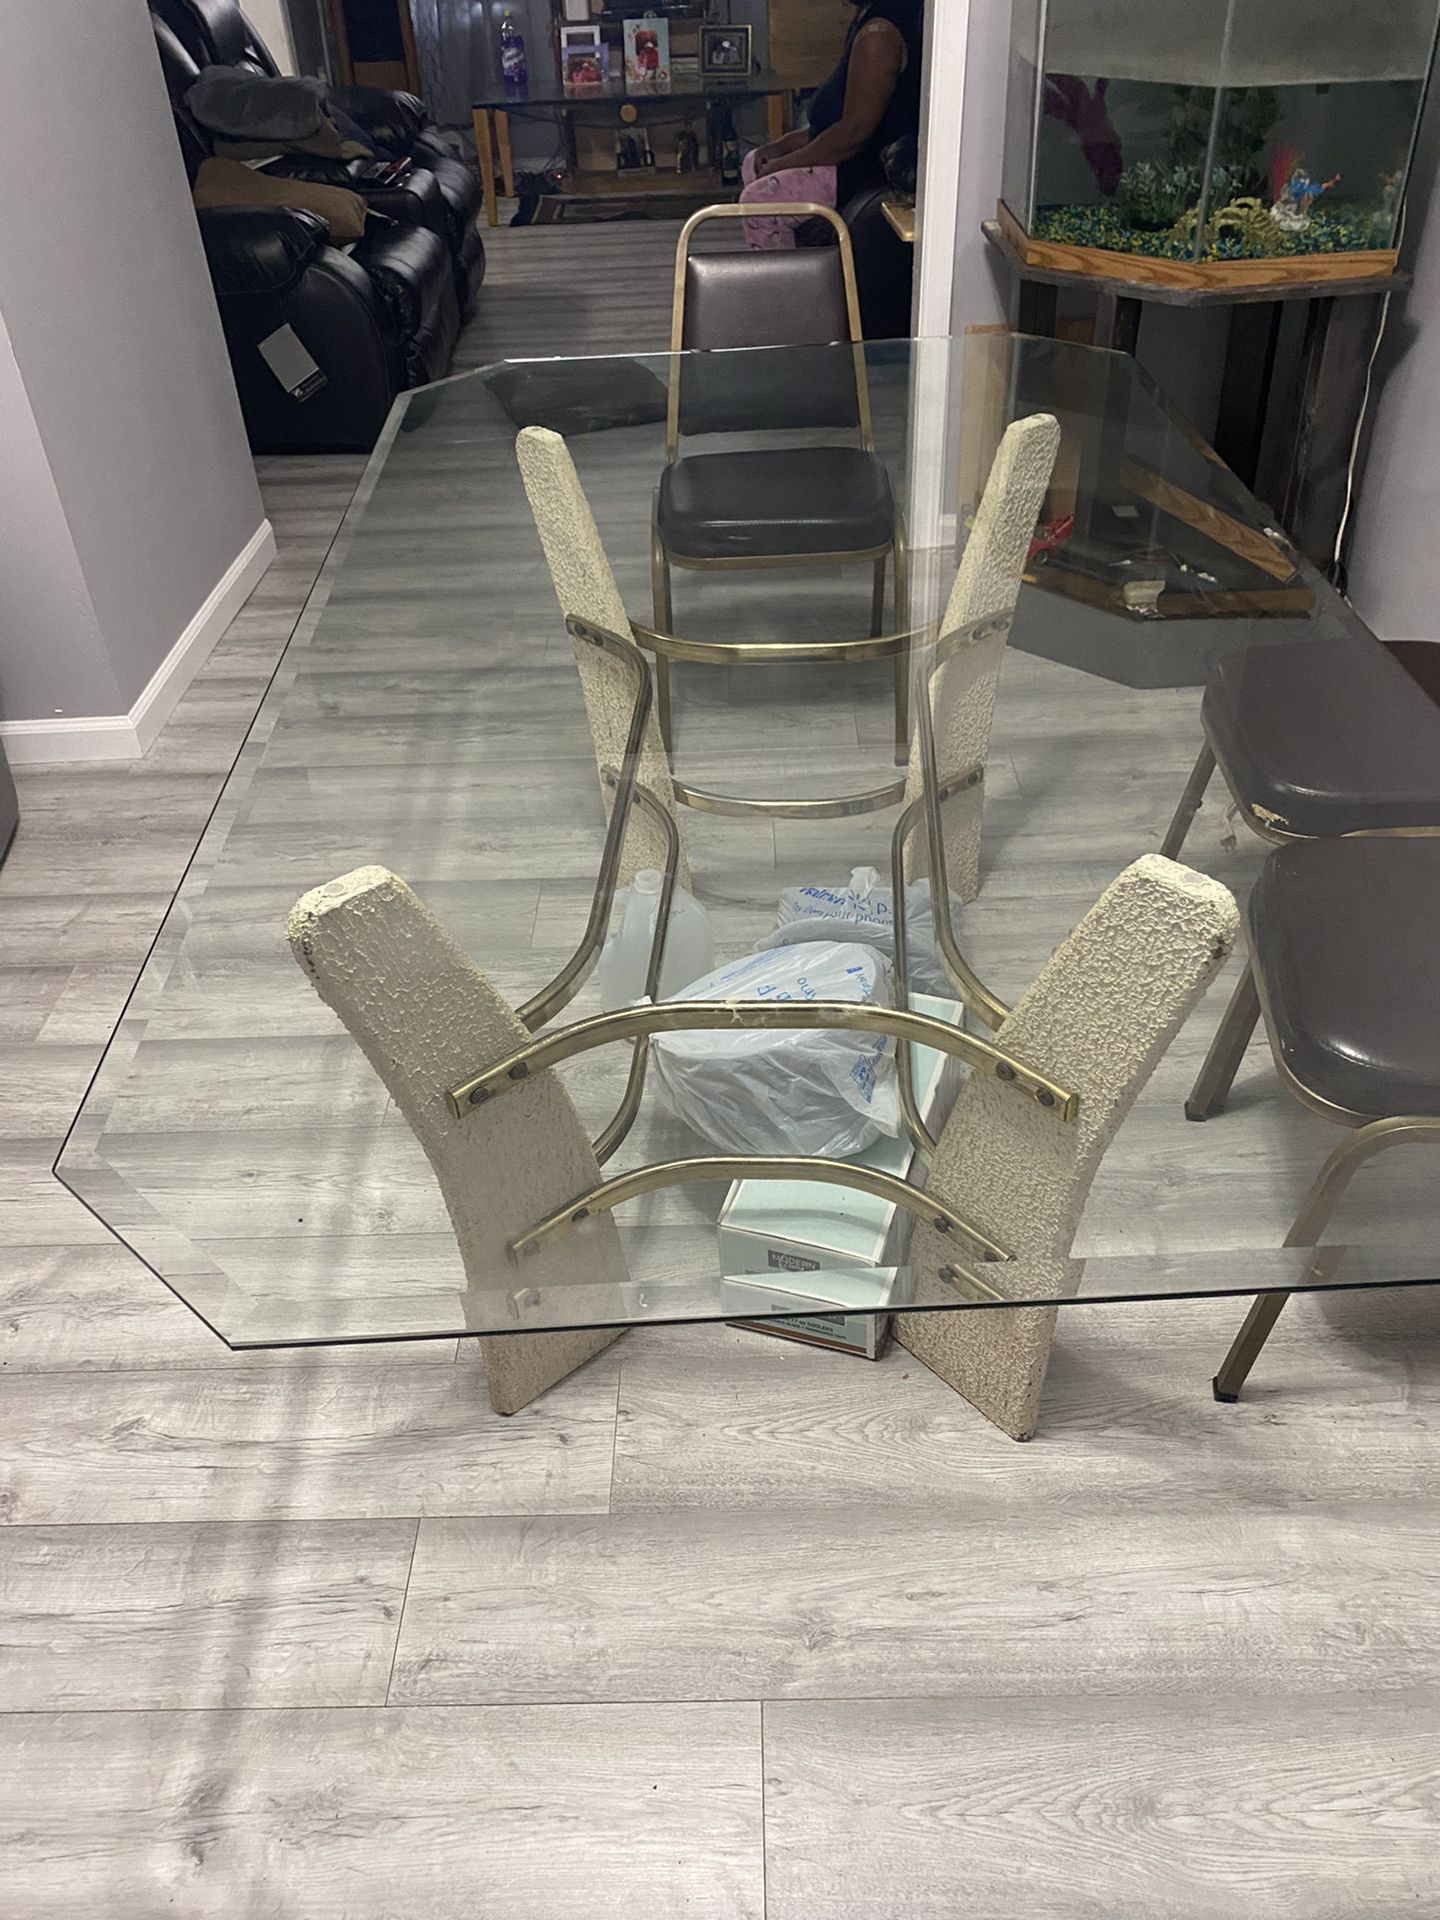 6ft Glass Table $75